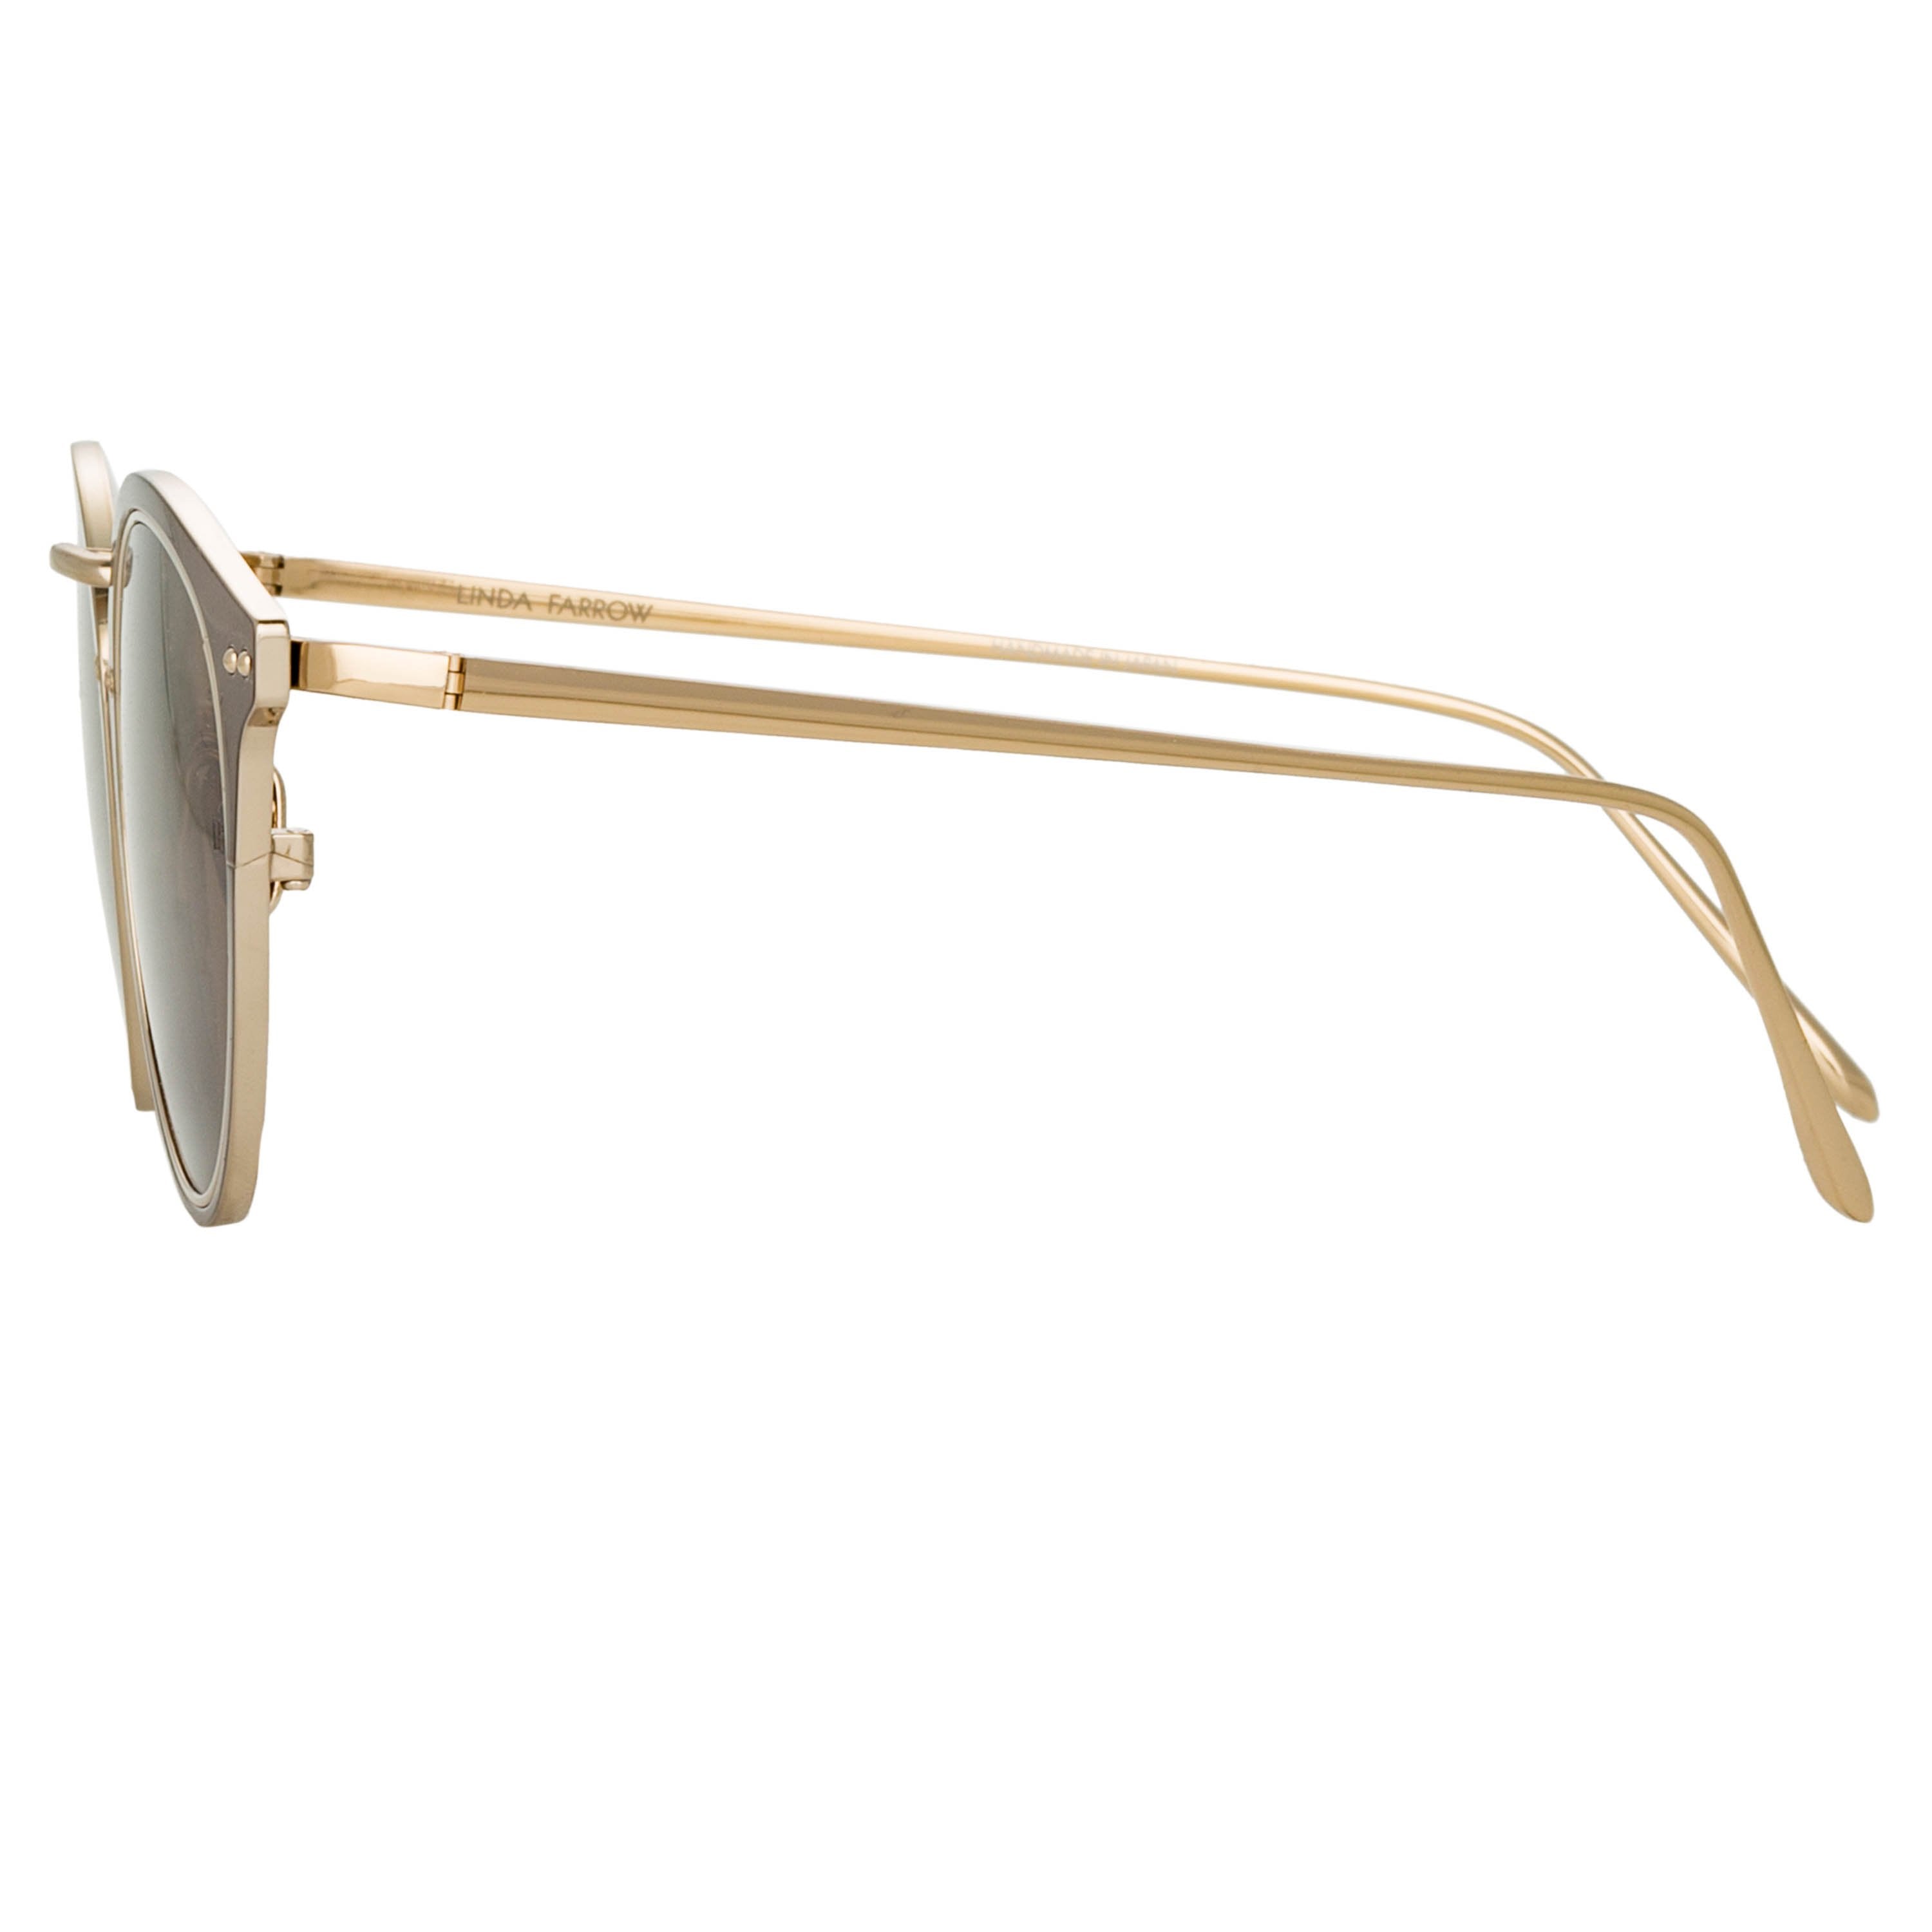 Color_LFL1051C3SUN - Cooper Oval Sunglasses in Light Gold and Brown